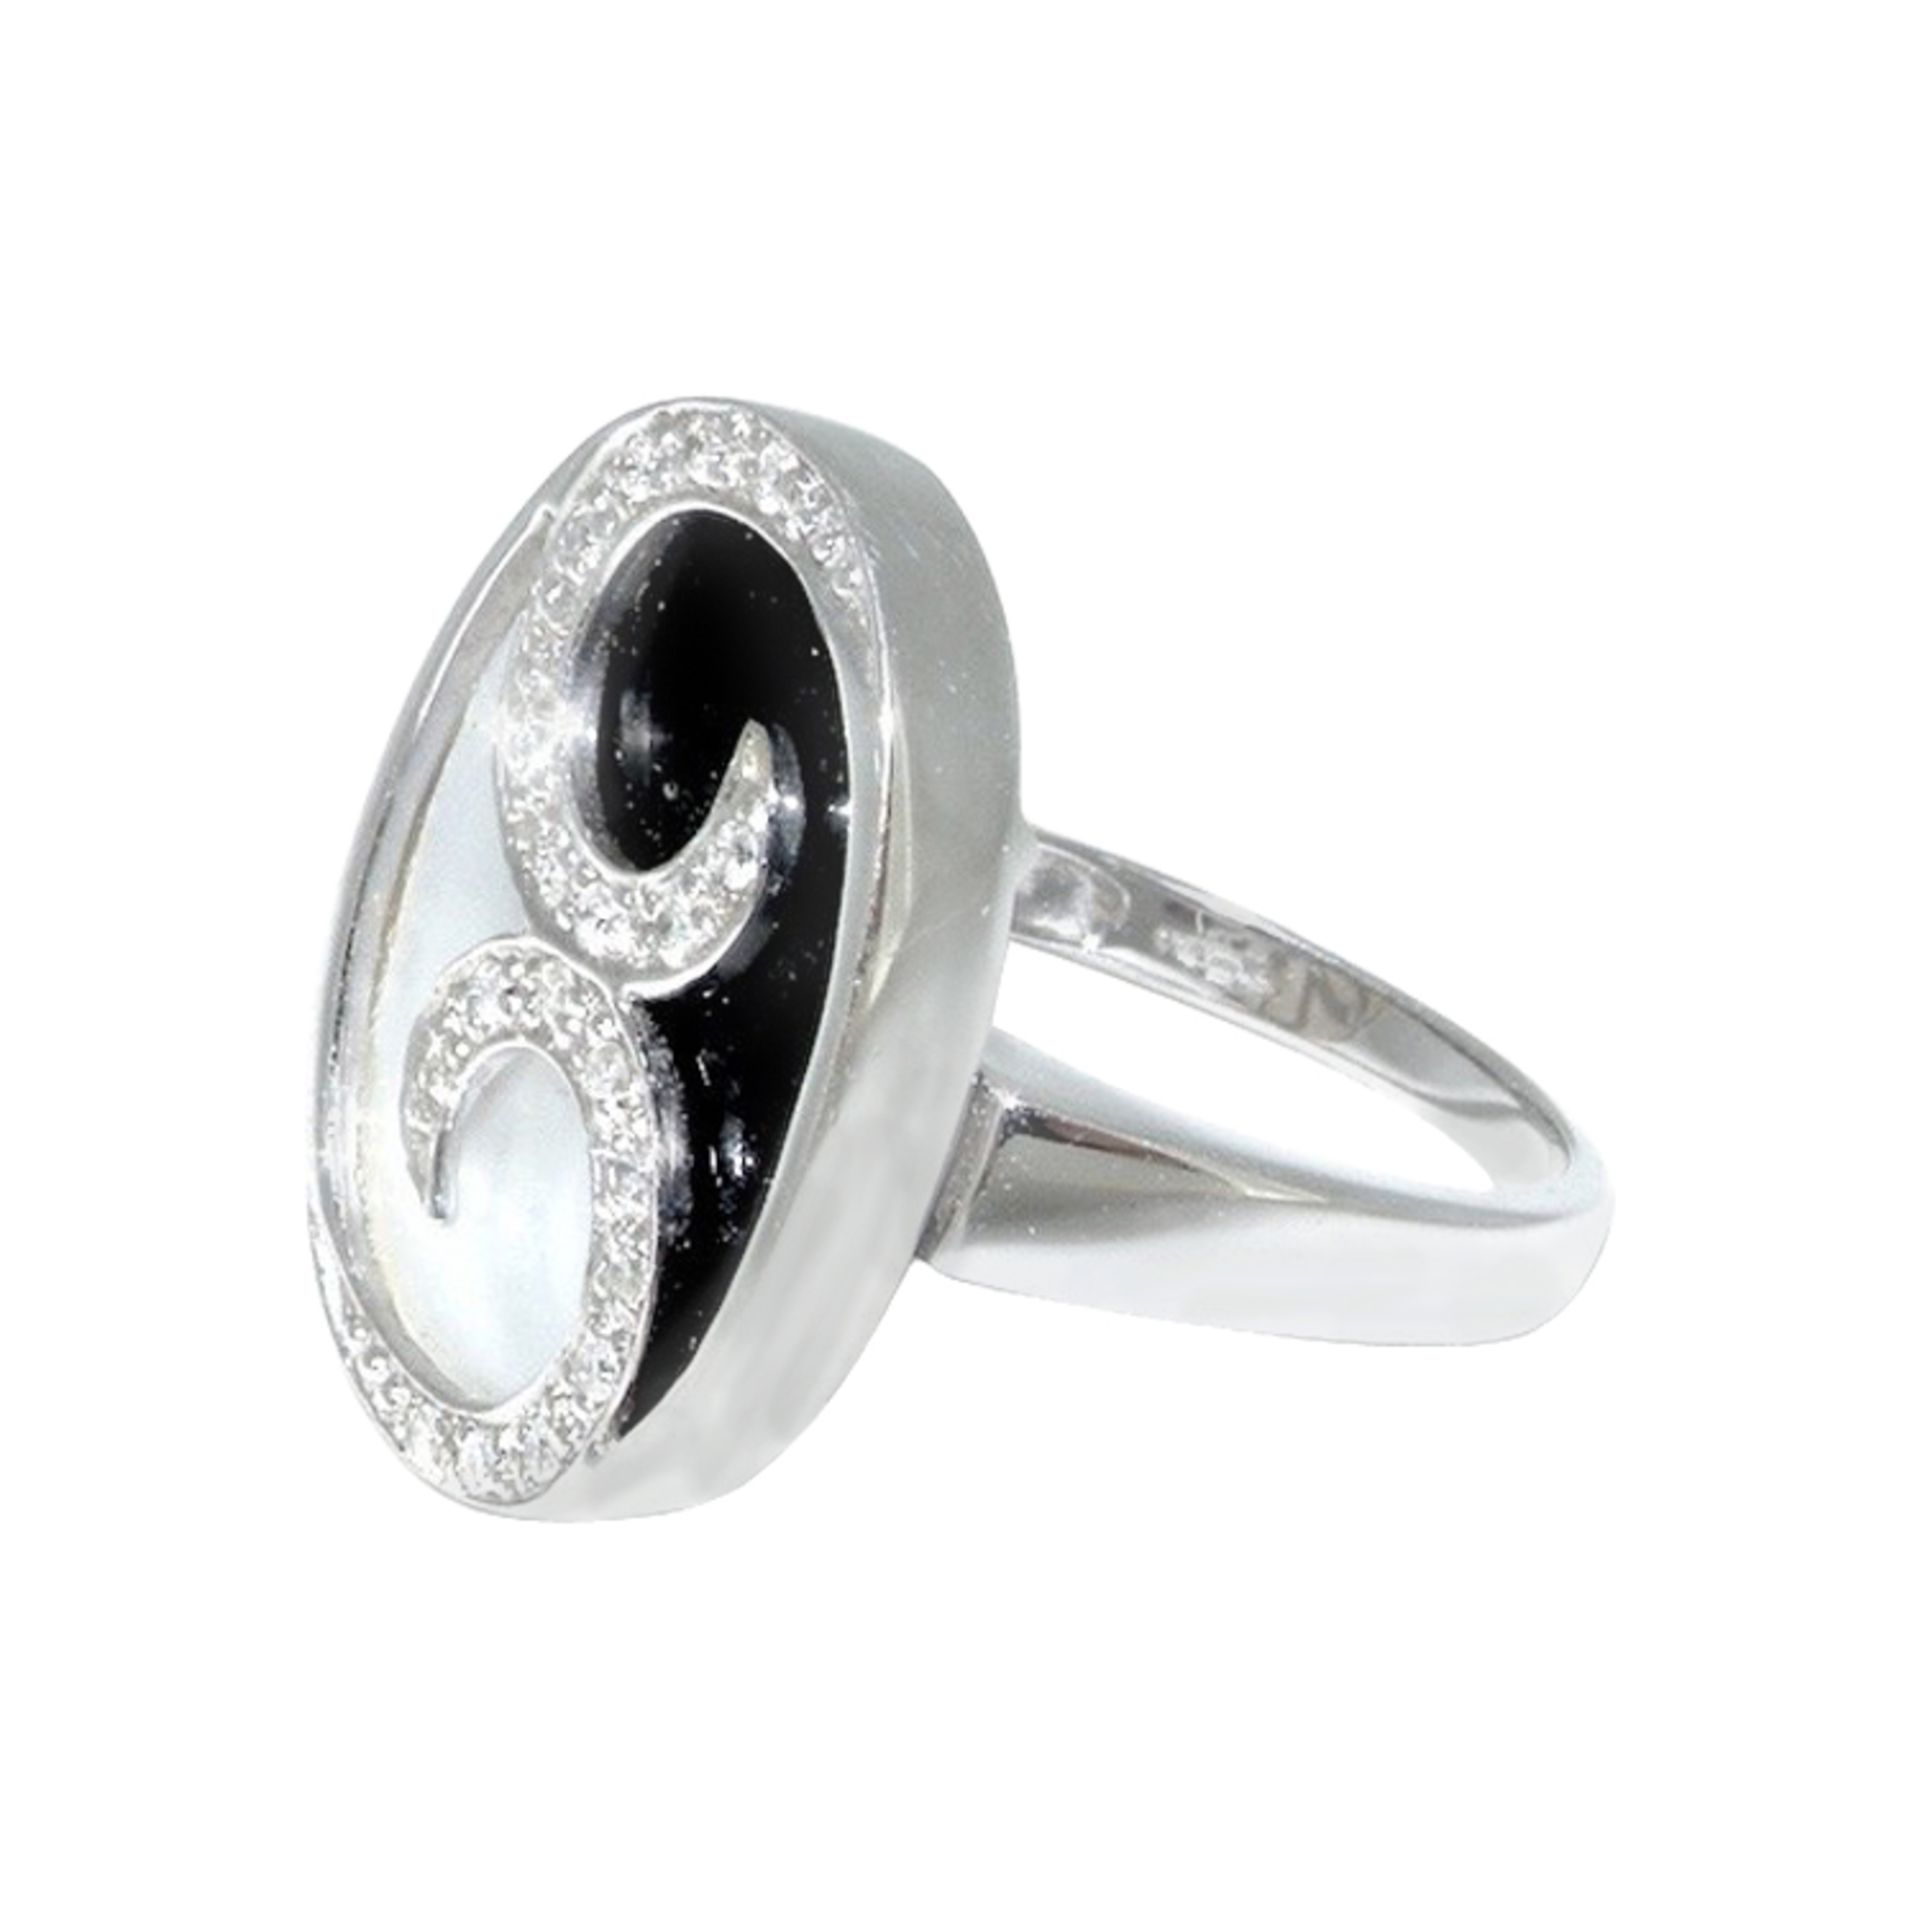 An Onyx, Mother Of Pearl And Diamond Ring - Image 2 of 5